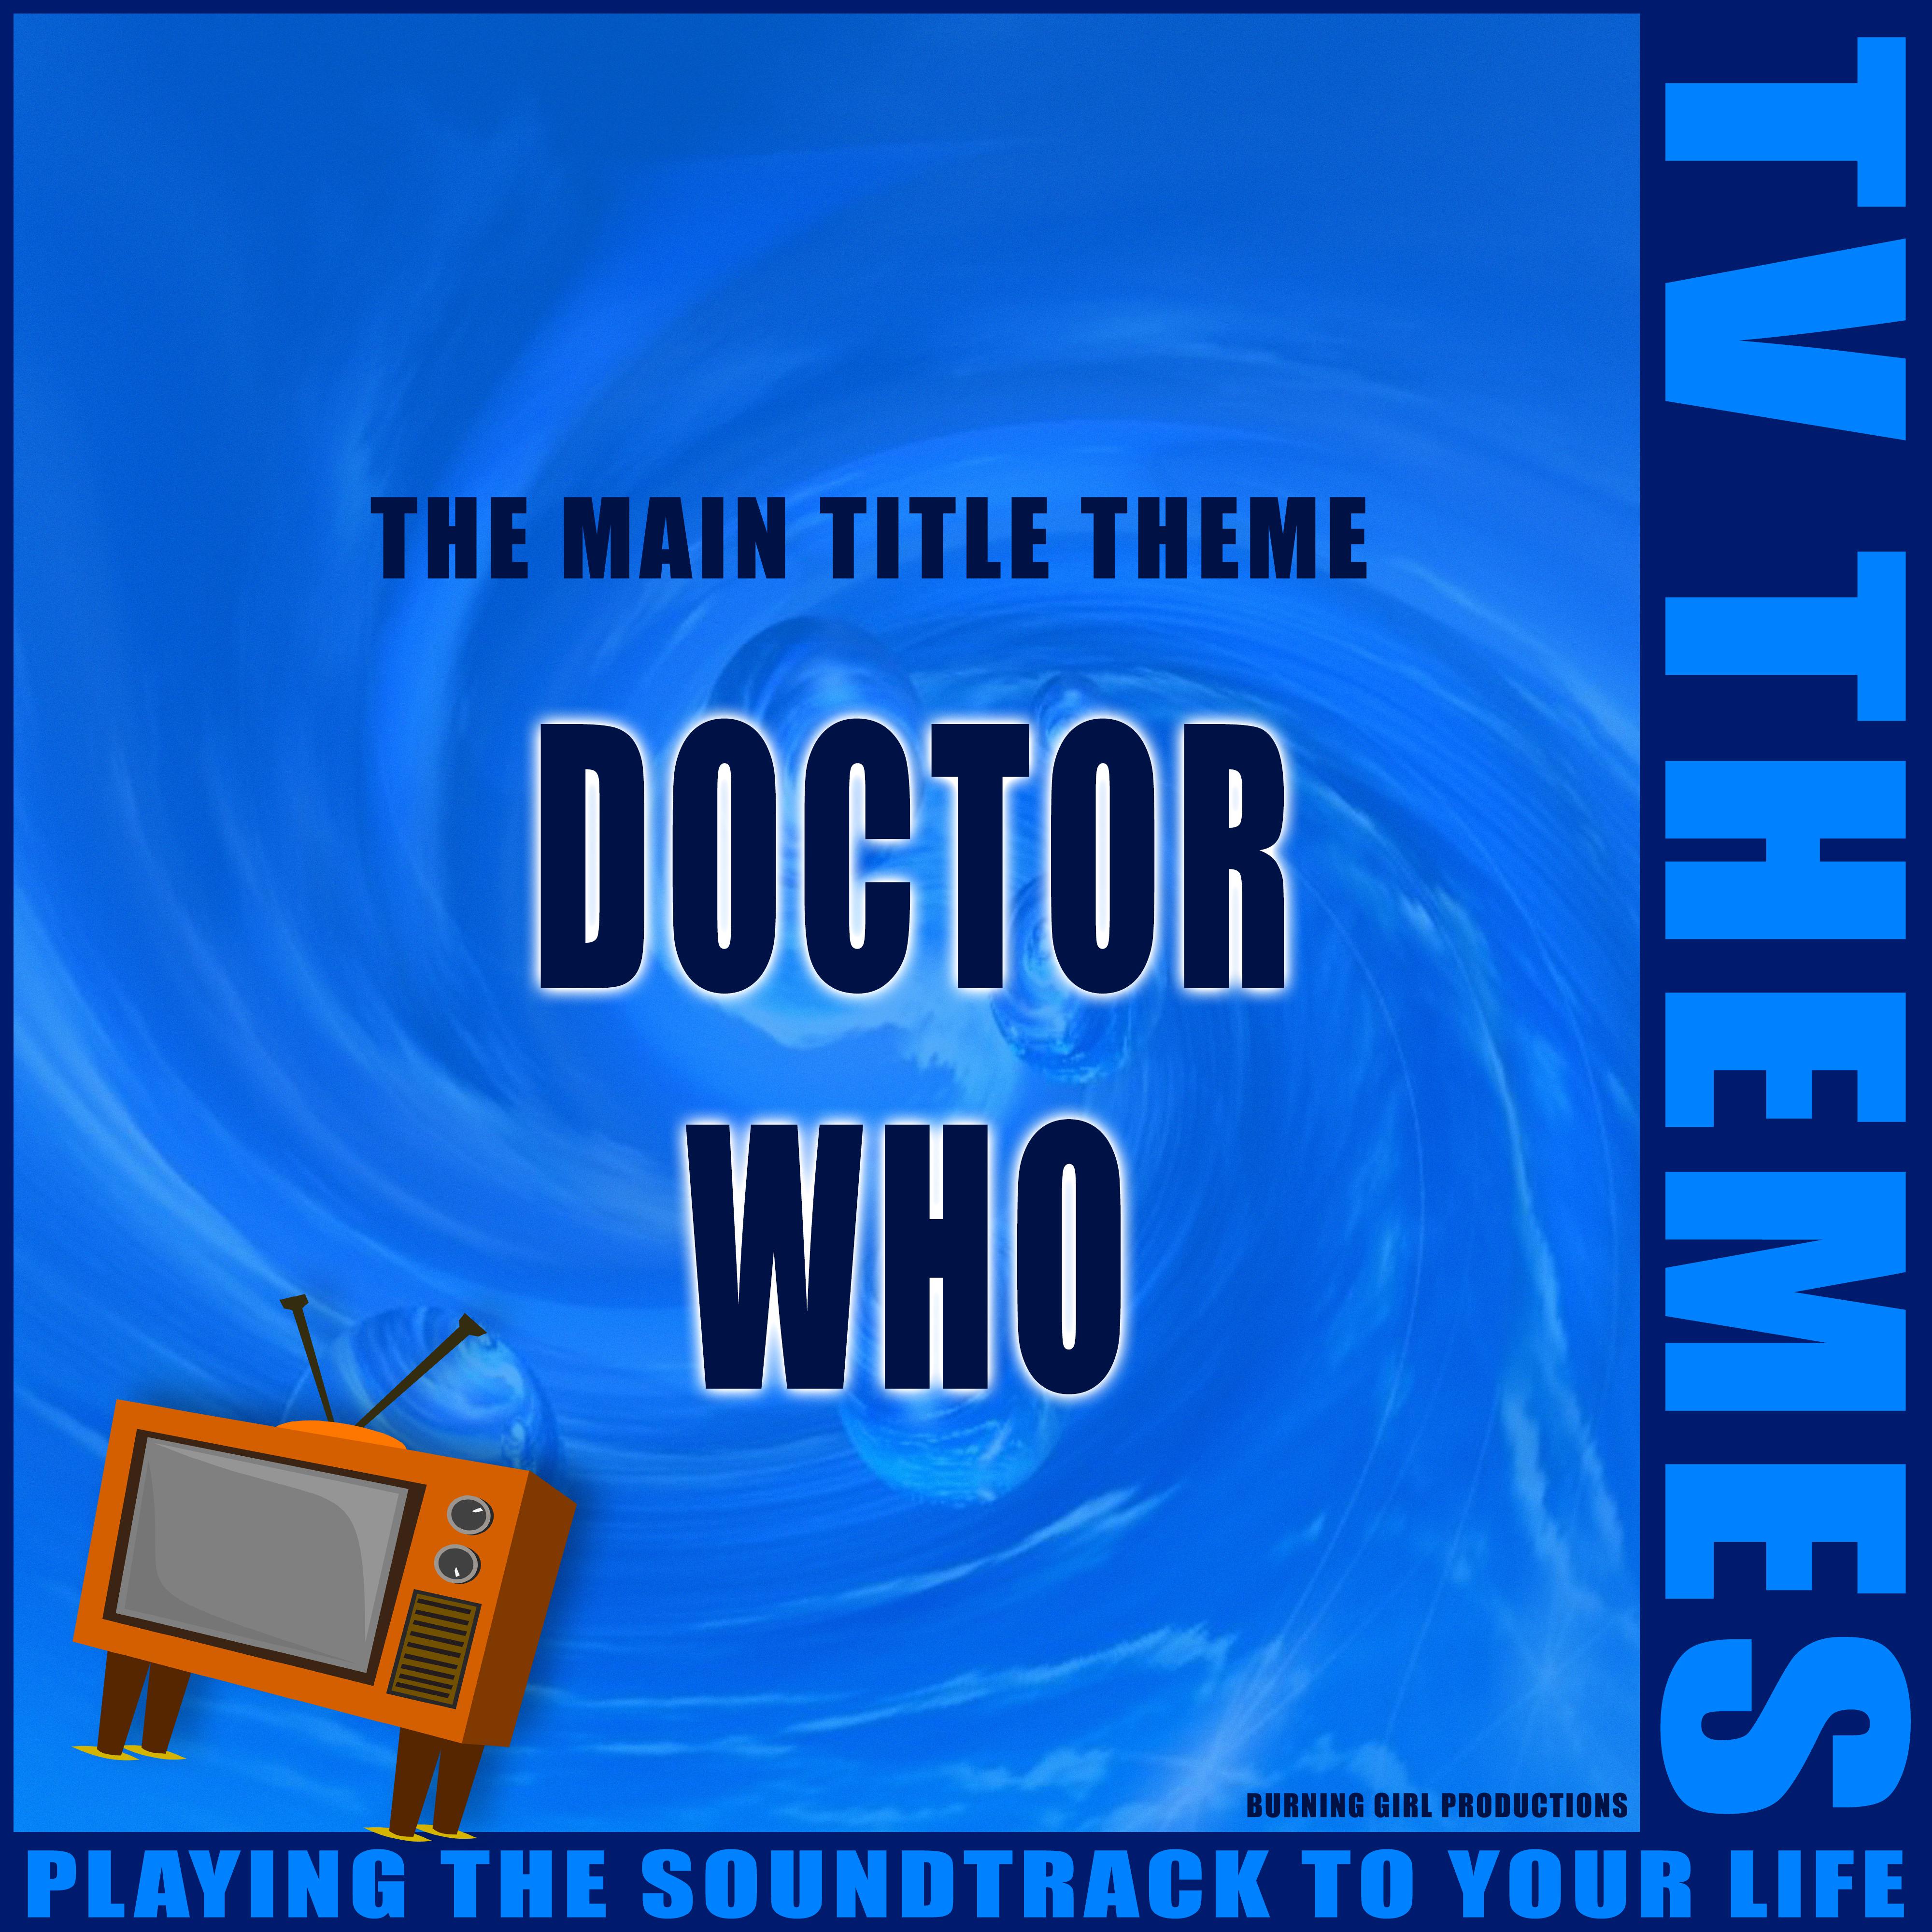 The Main Title Theme - Doctor Who